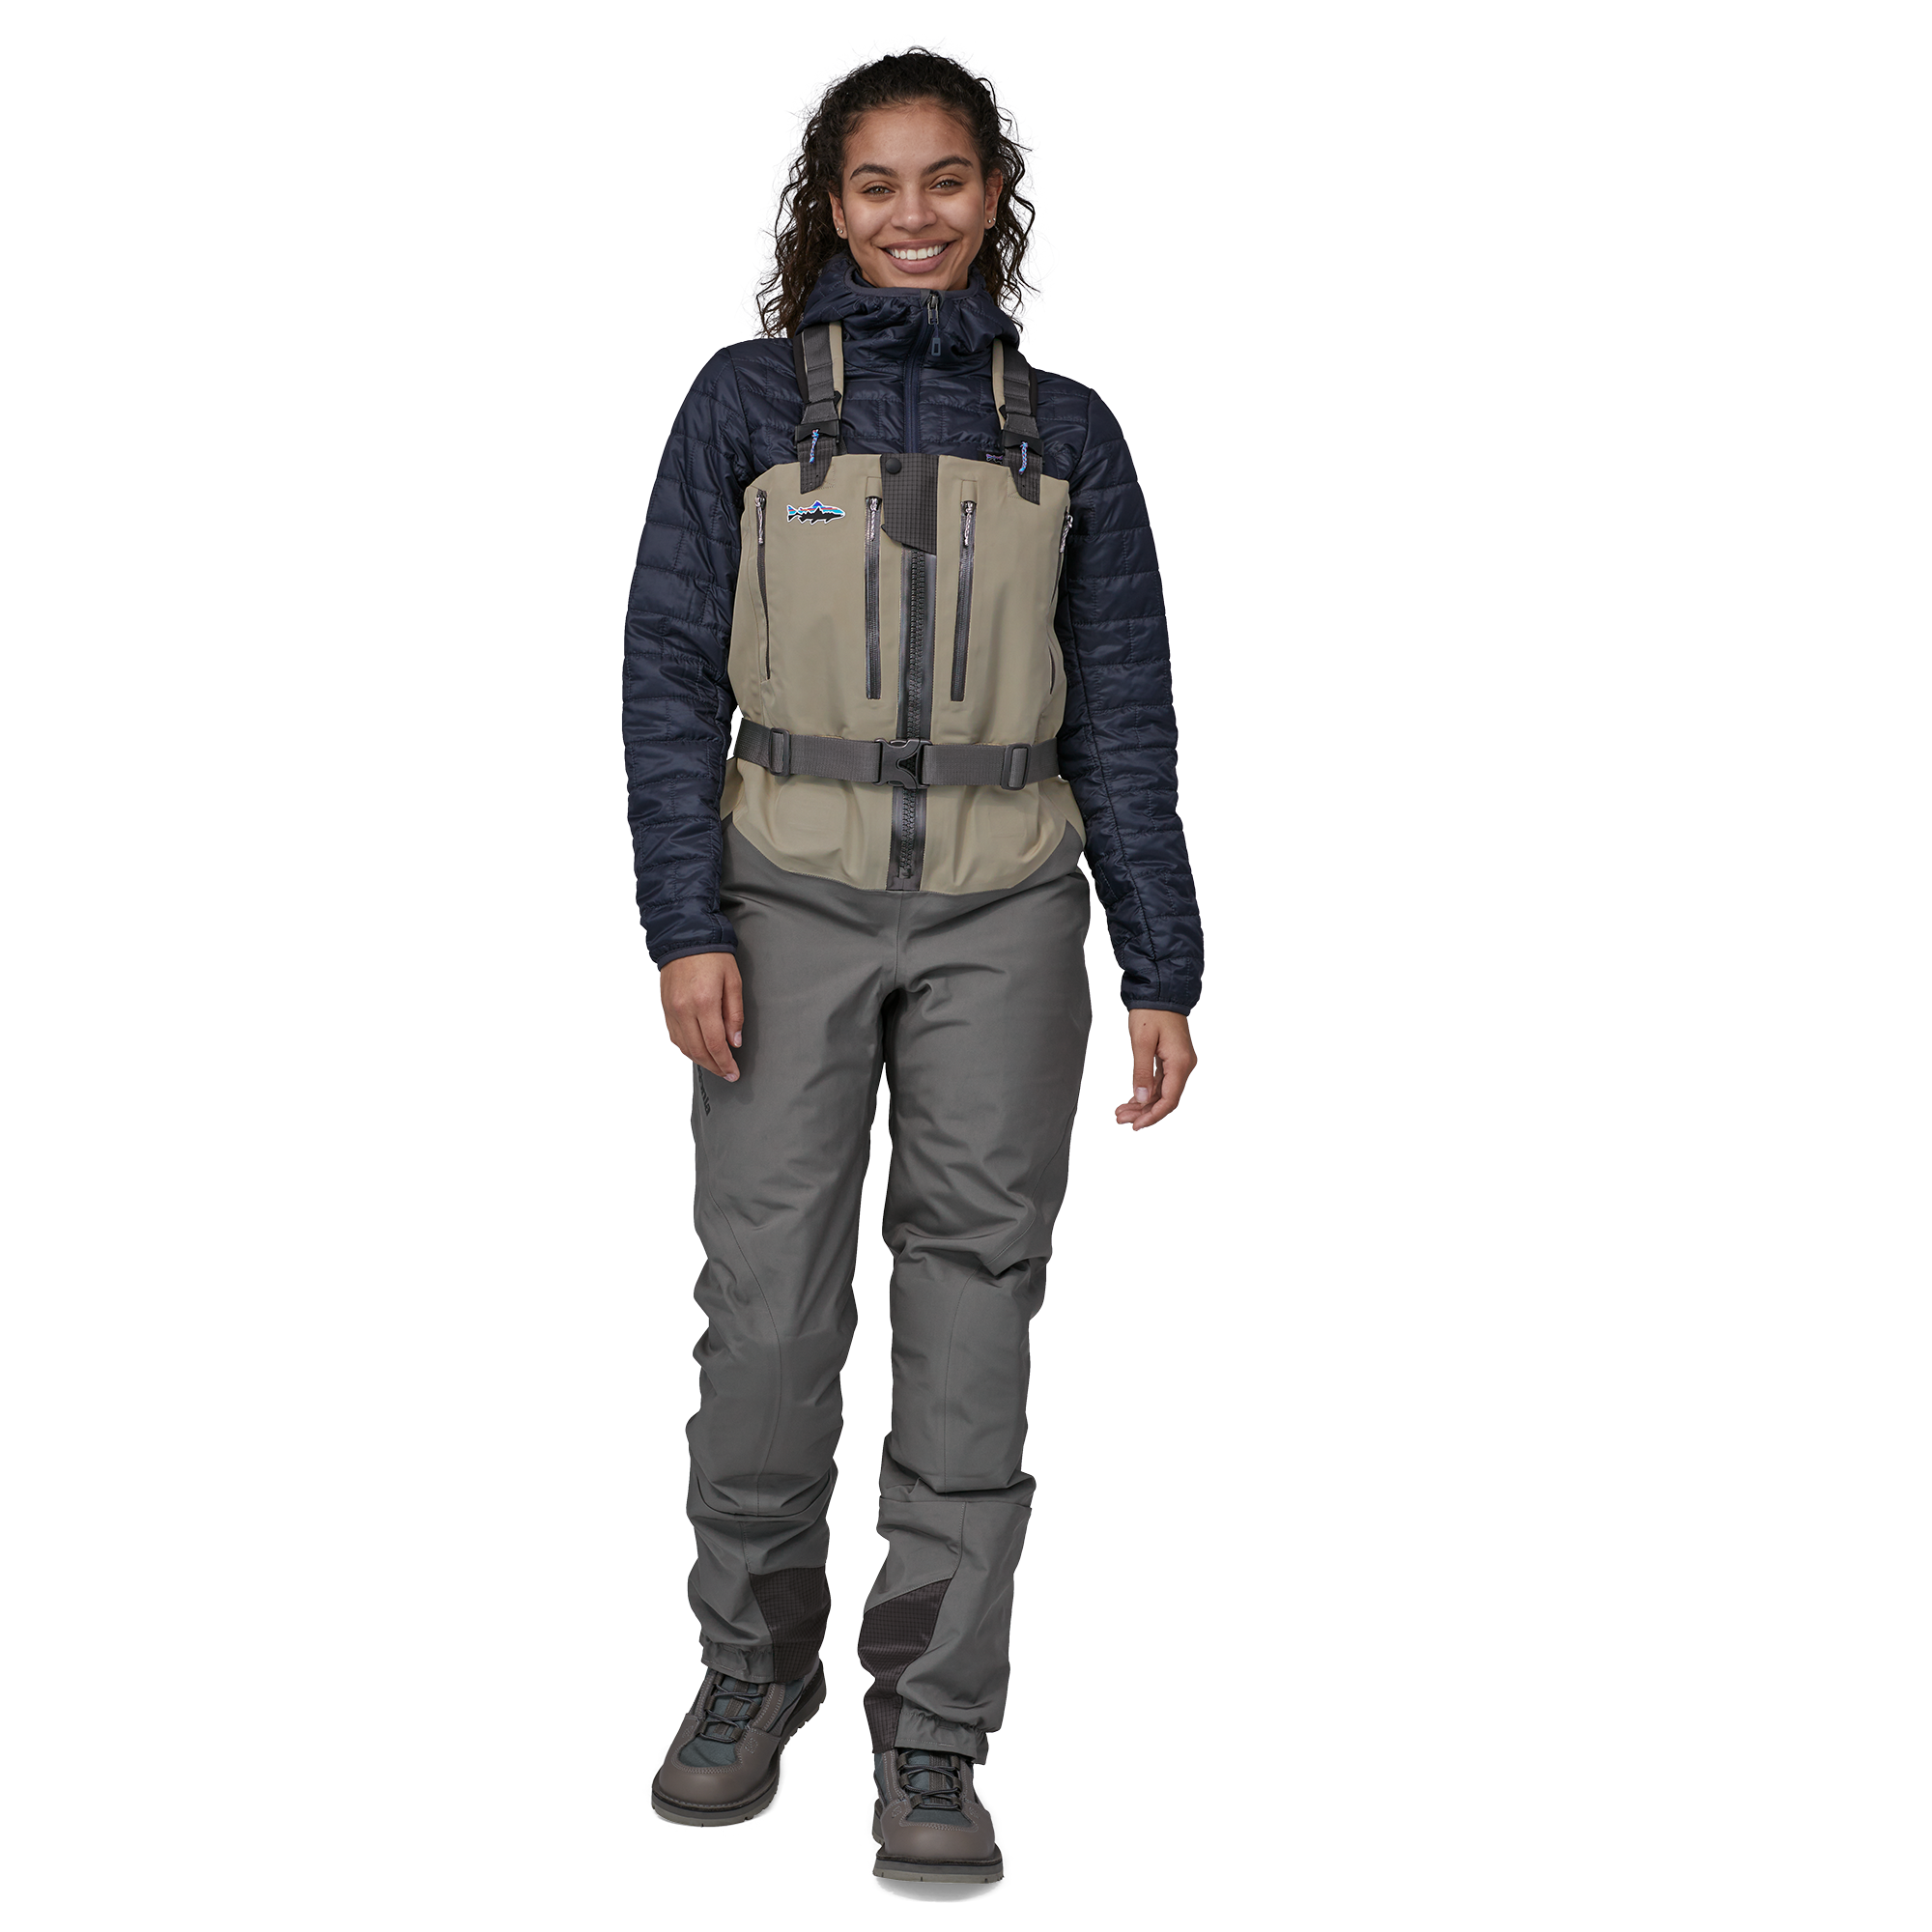 Patagonia Women's Swiftcurrent Waders - Royal Gorge Anglers